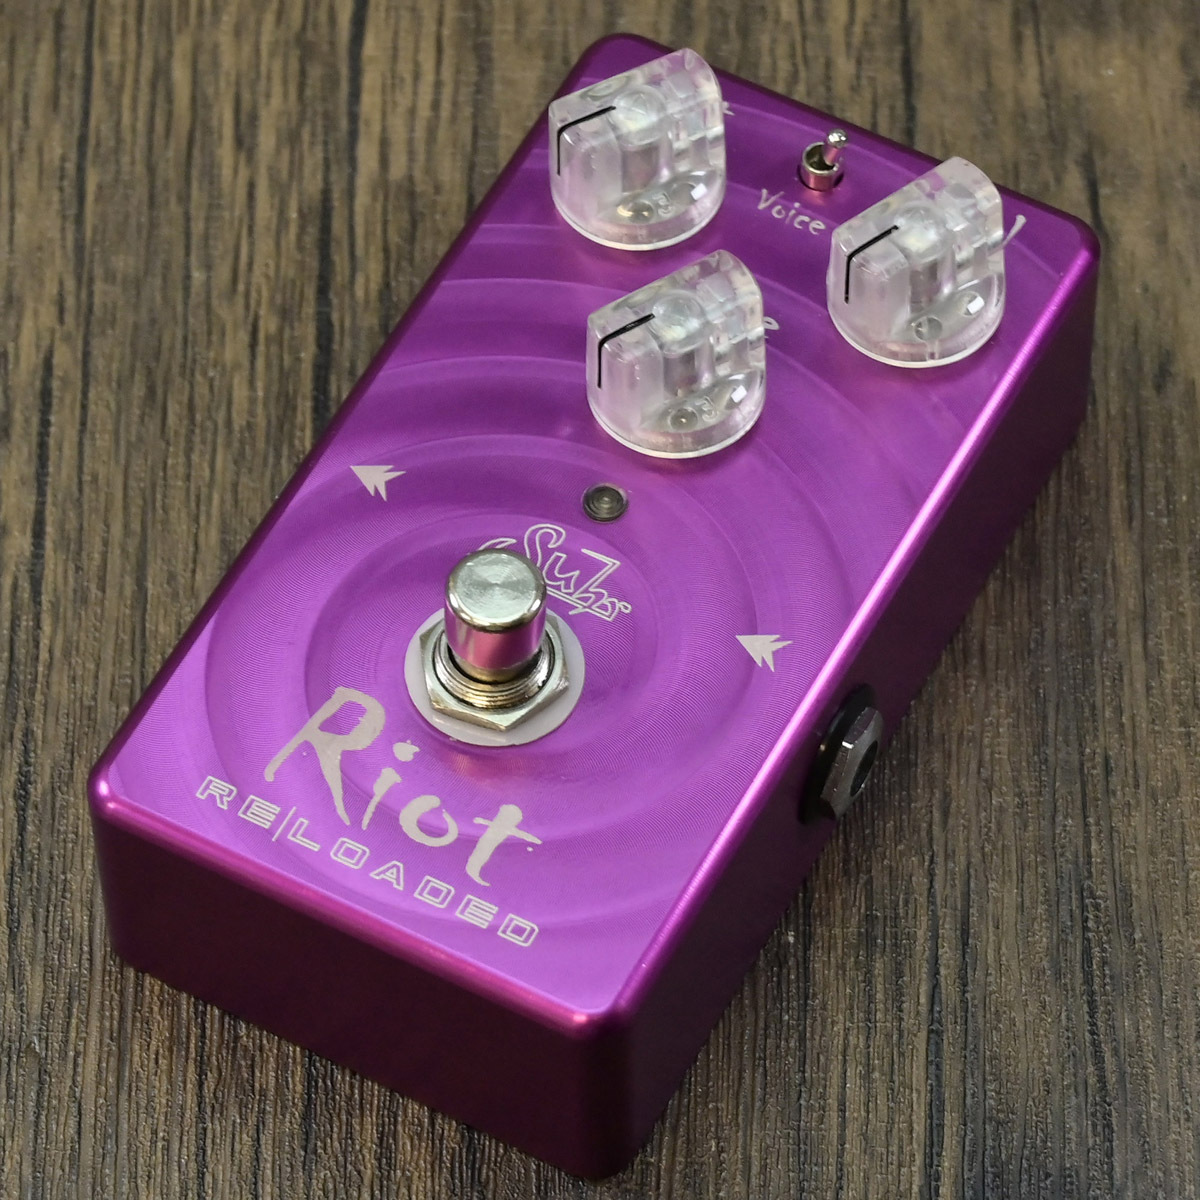 Suhr Riot Distortion Reloaded　ディストーション